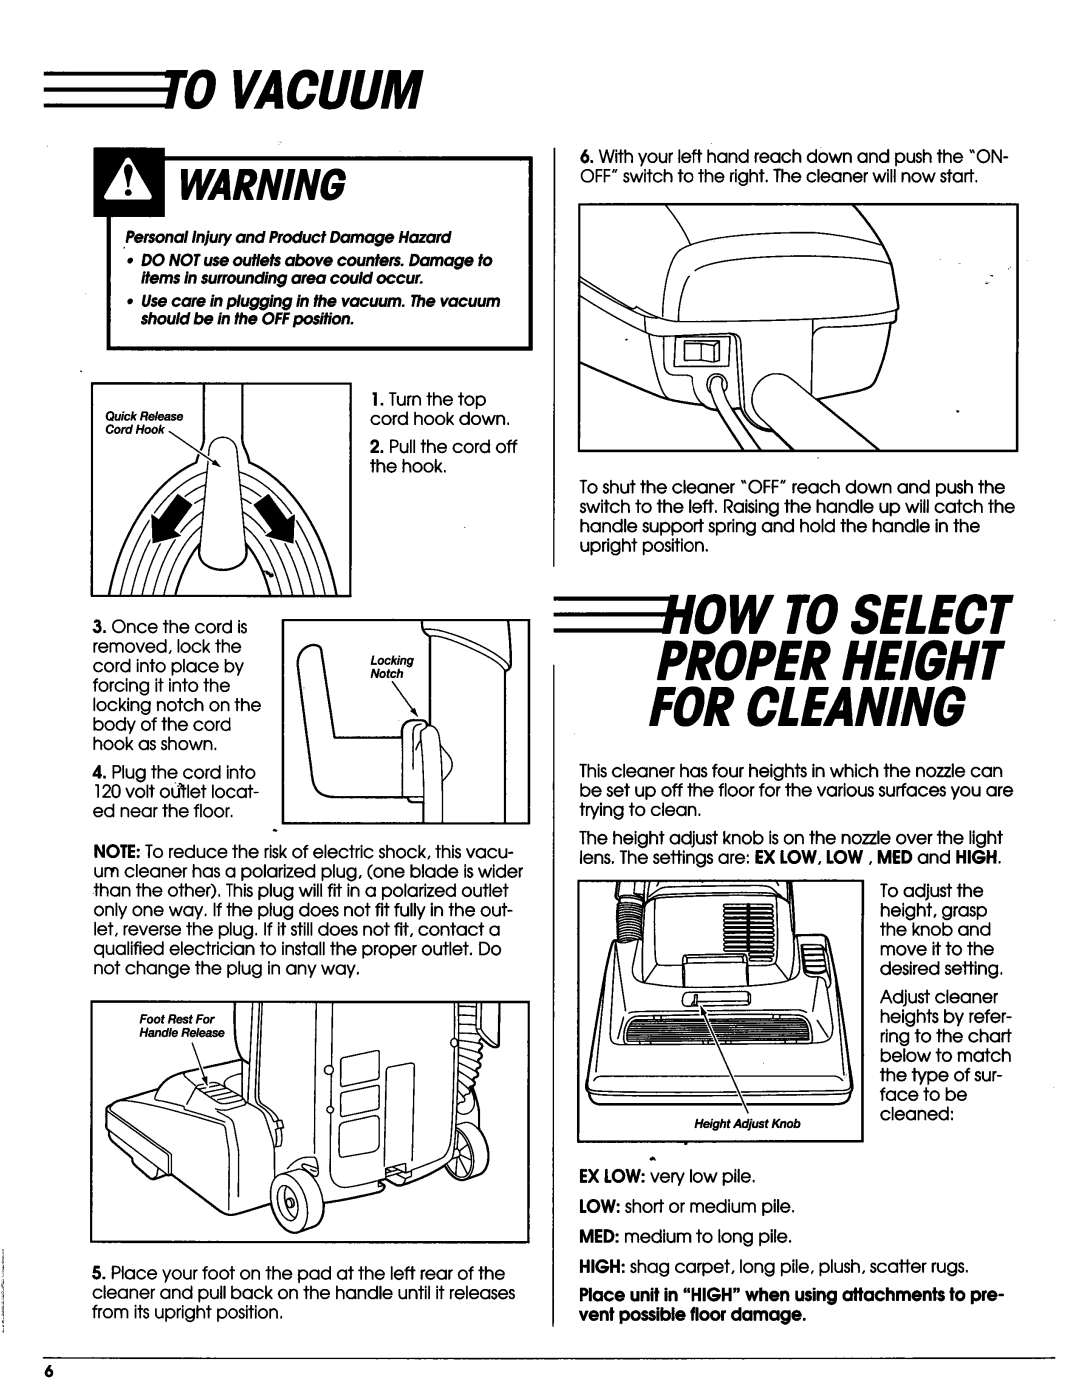 Sears Vacuum Cleaner owner manual W Toselect Properheight Forcleaning, the type ofsur- face tobe cleaned 